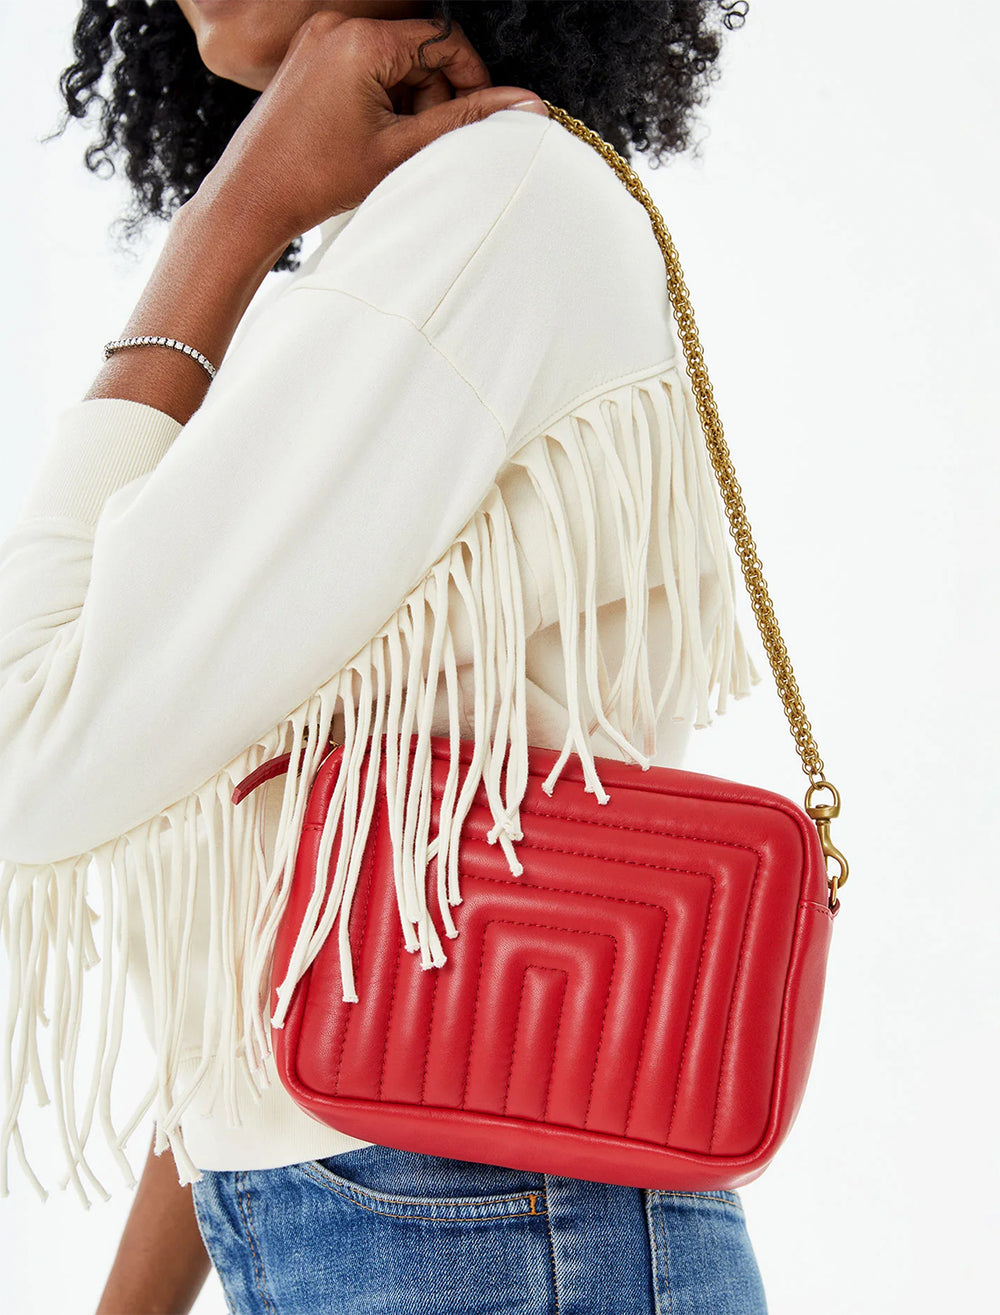 Model wearing Clare V.'s midi sac in rouge channel quilted on her shoulder.